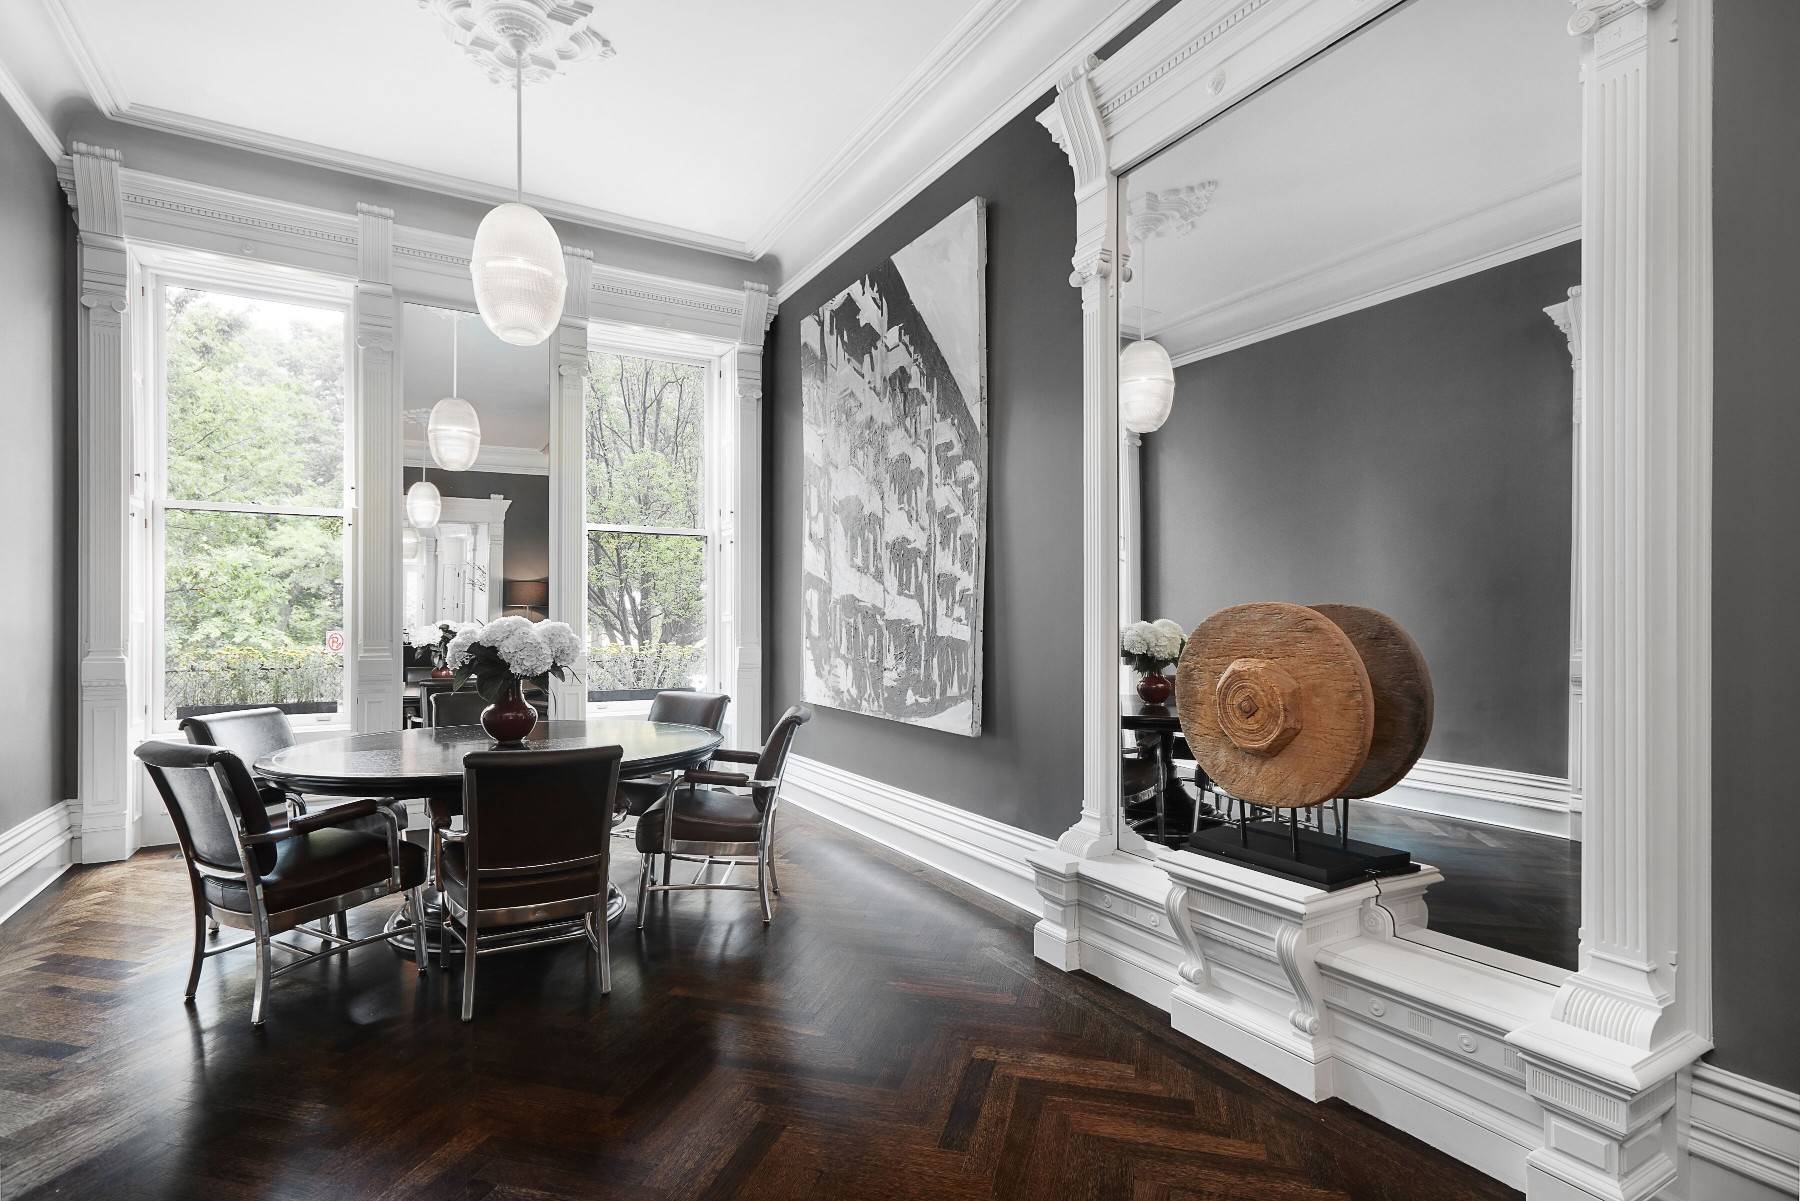 Classic interiors and modern luxuries are tastefully matched in this gorgeous 24 ft wide, five bedroom, seven bathroom, 7, 000 SF town home, located in Harlems historic Mount Morris Park.